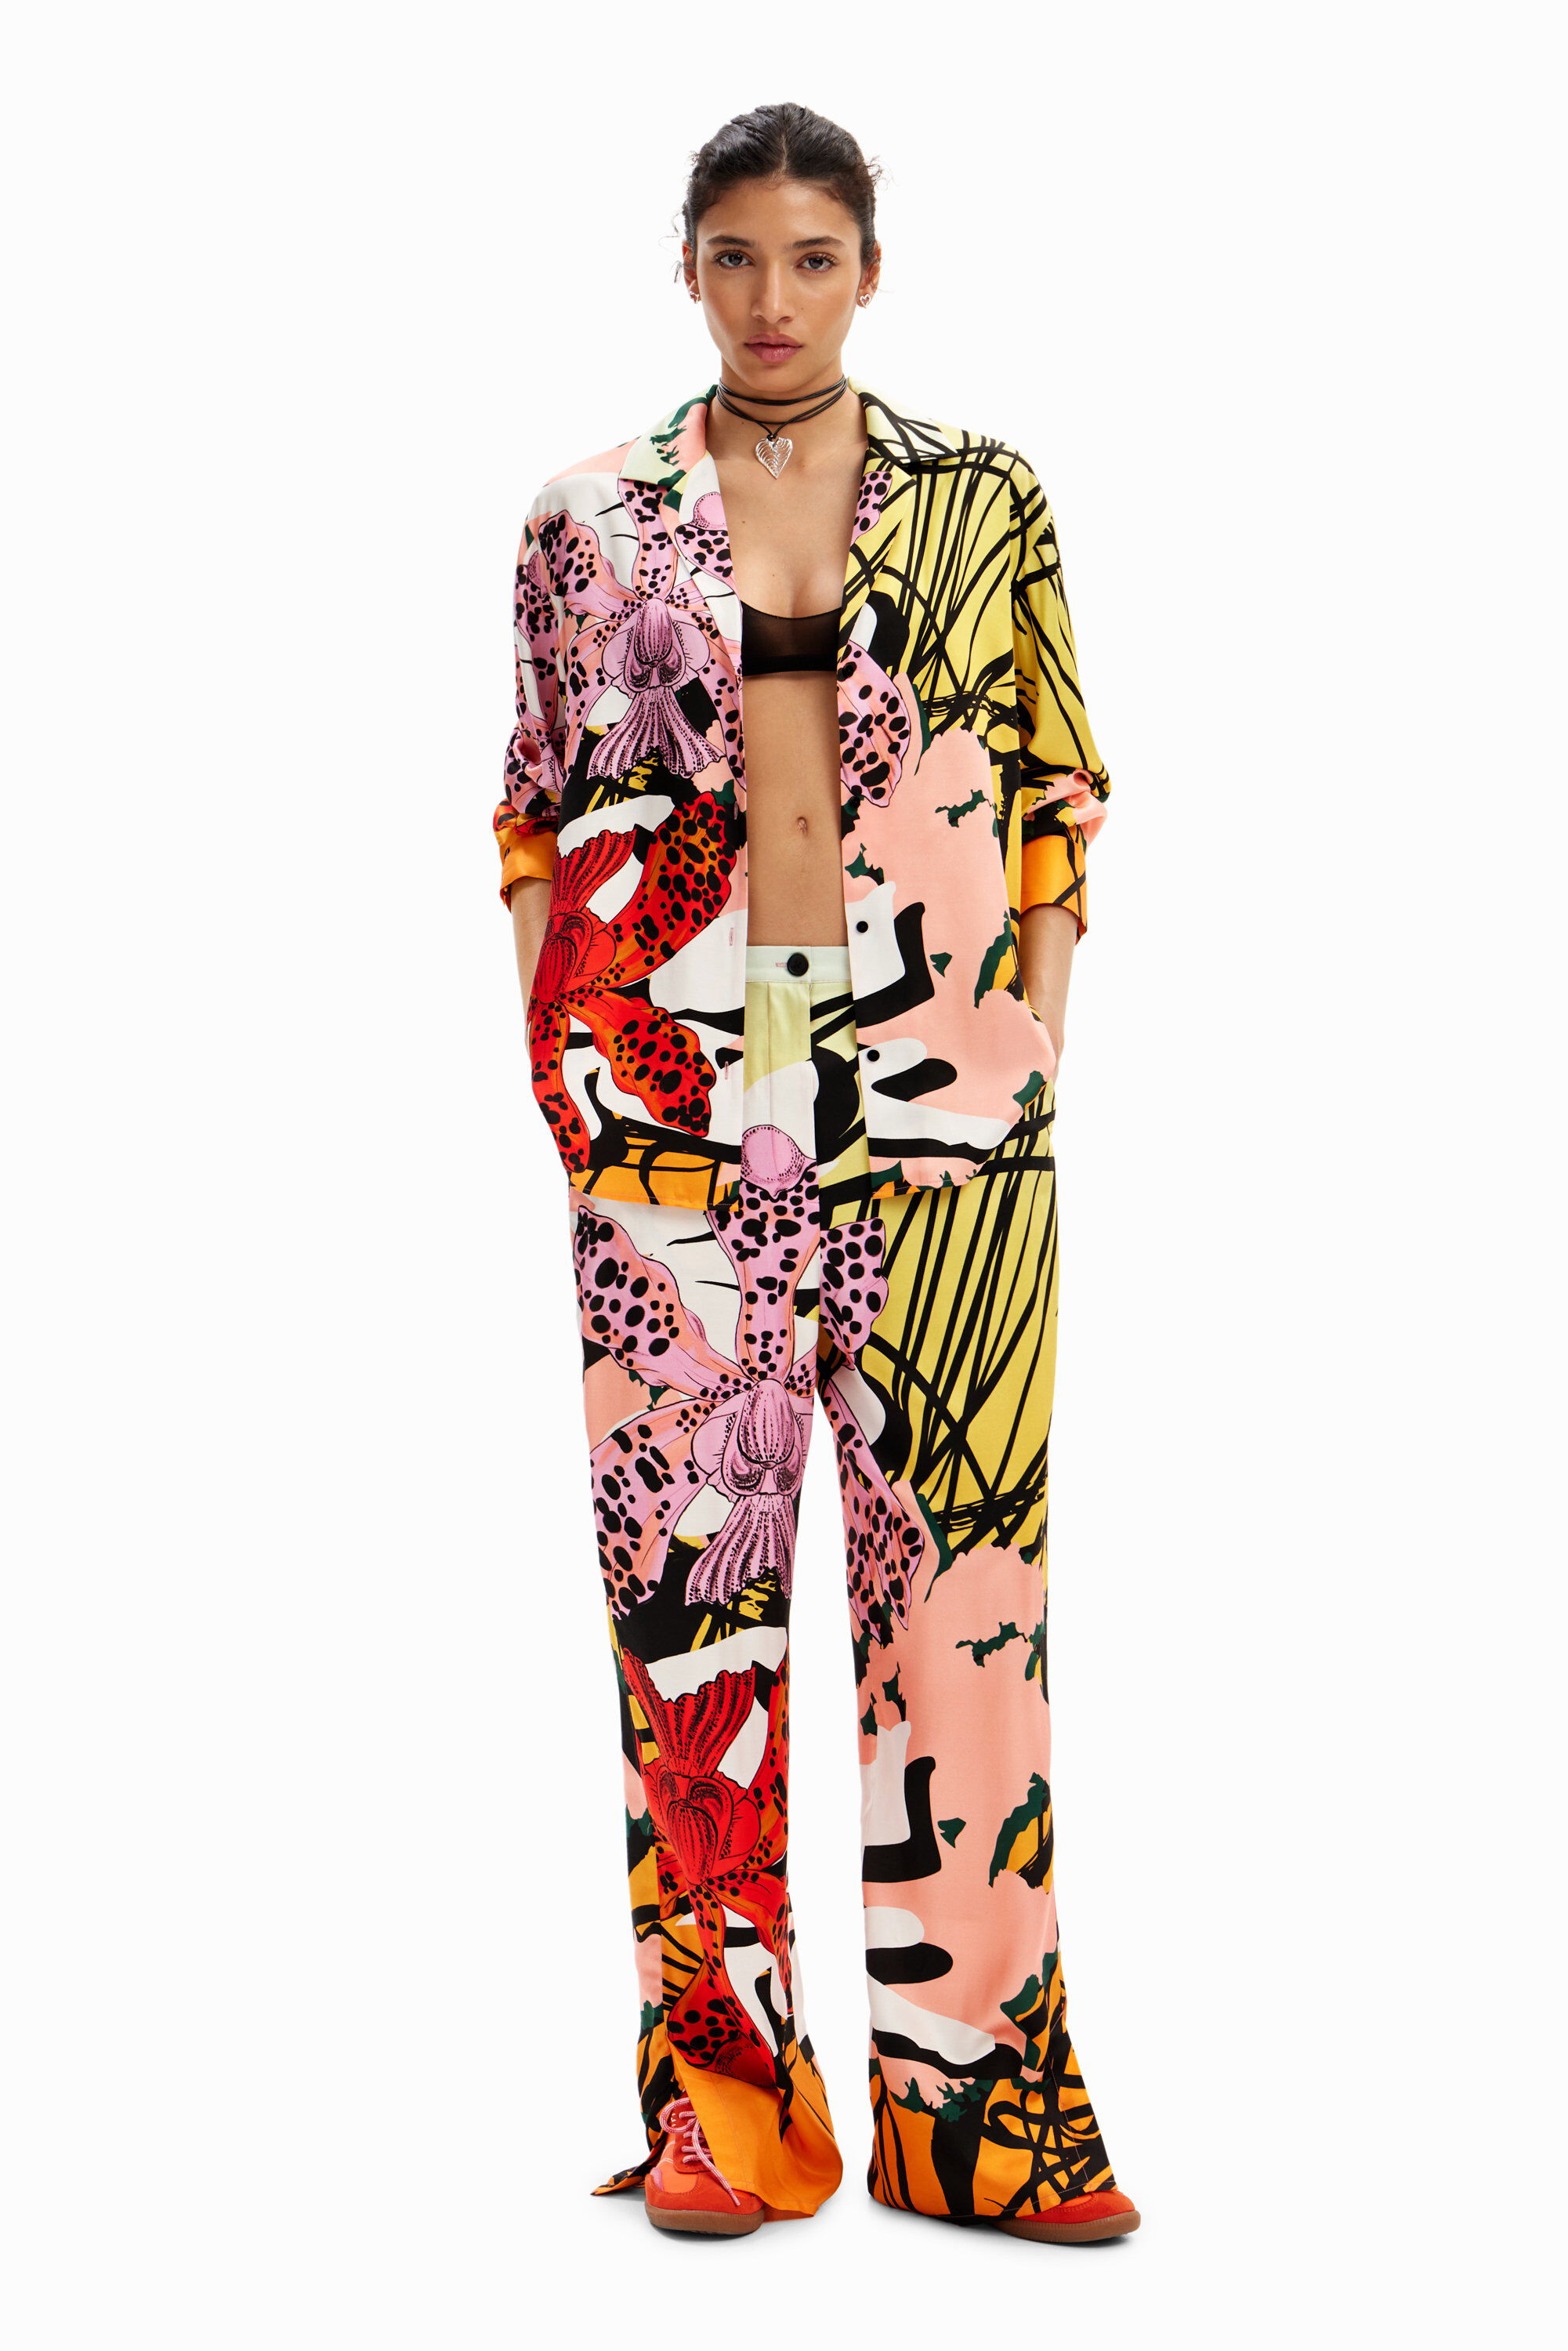 Desigual M. Christian Lacroix Silk Orchid Trousers In Material Finishes